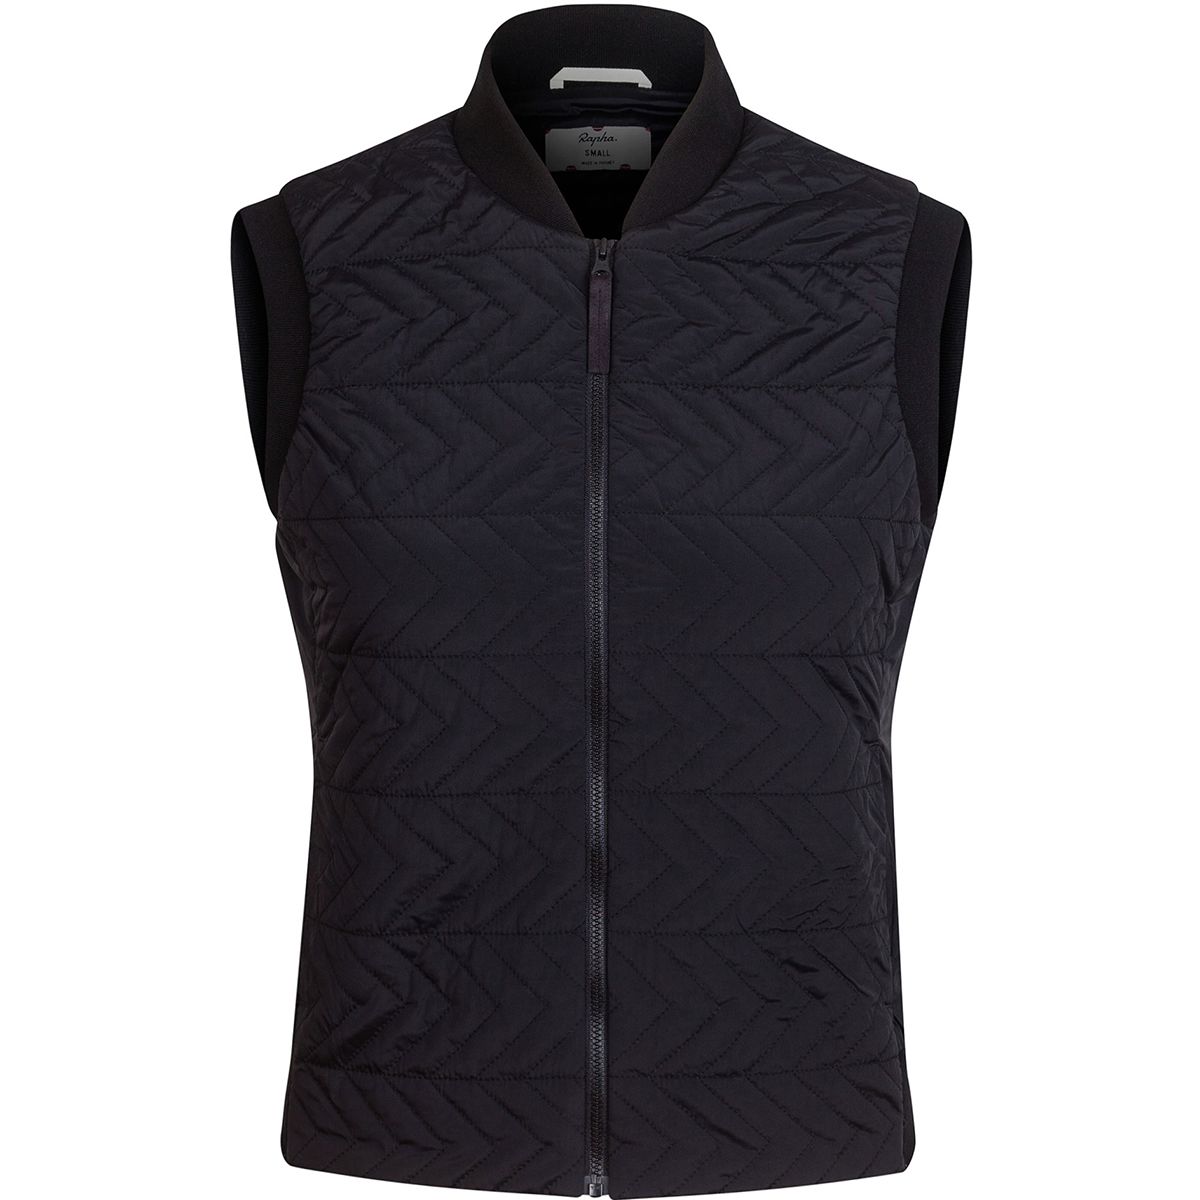 Rapha Quilted Gilet - Women's